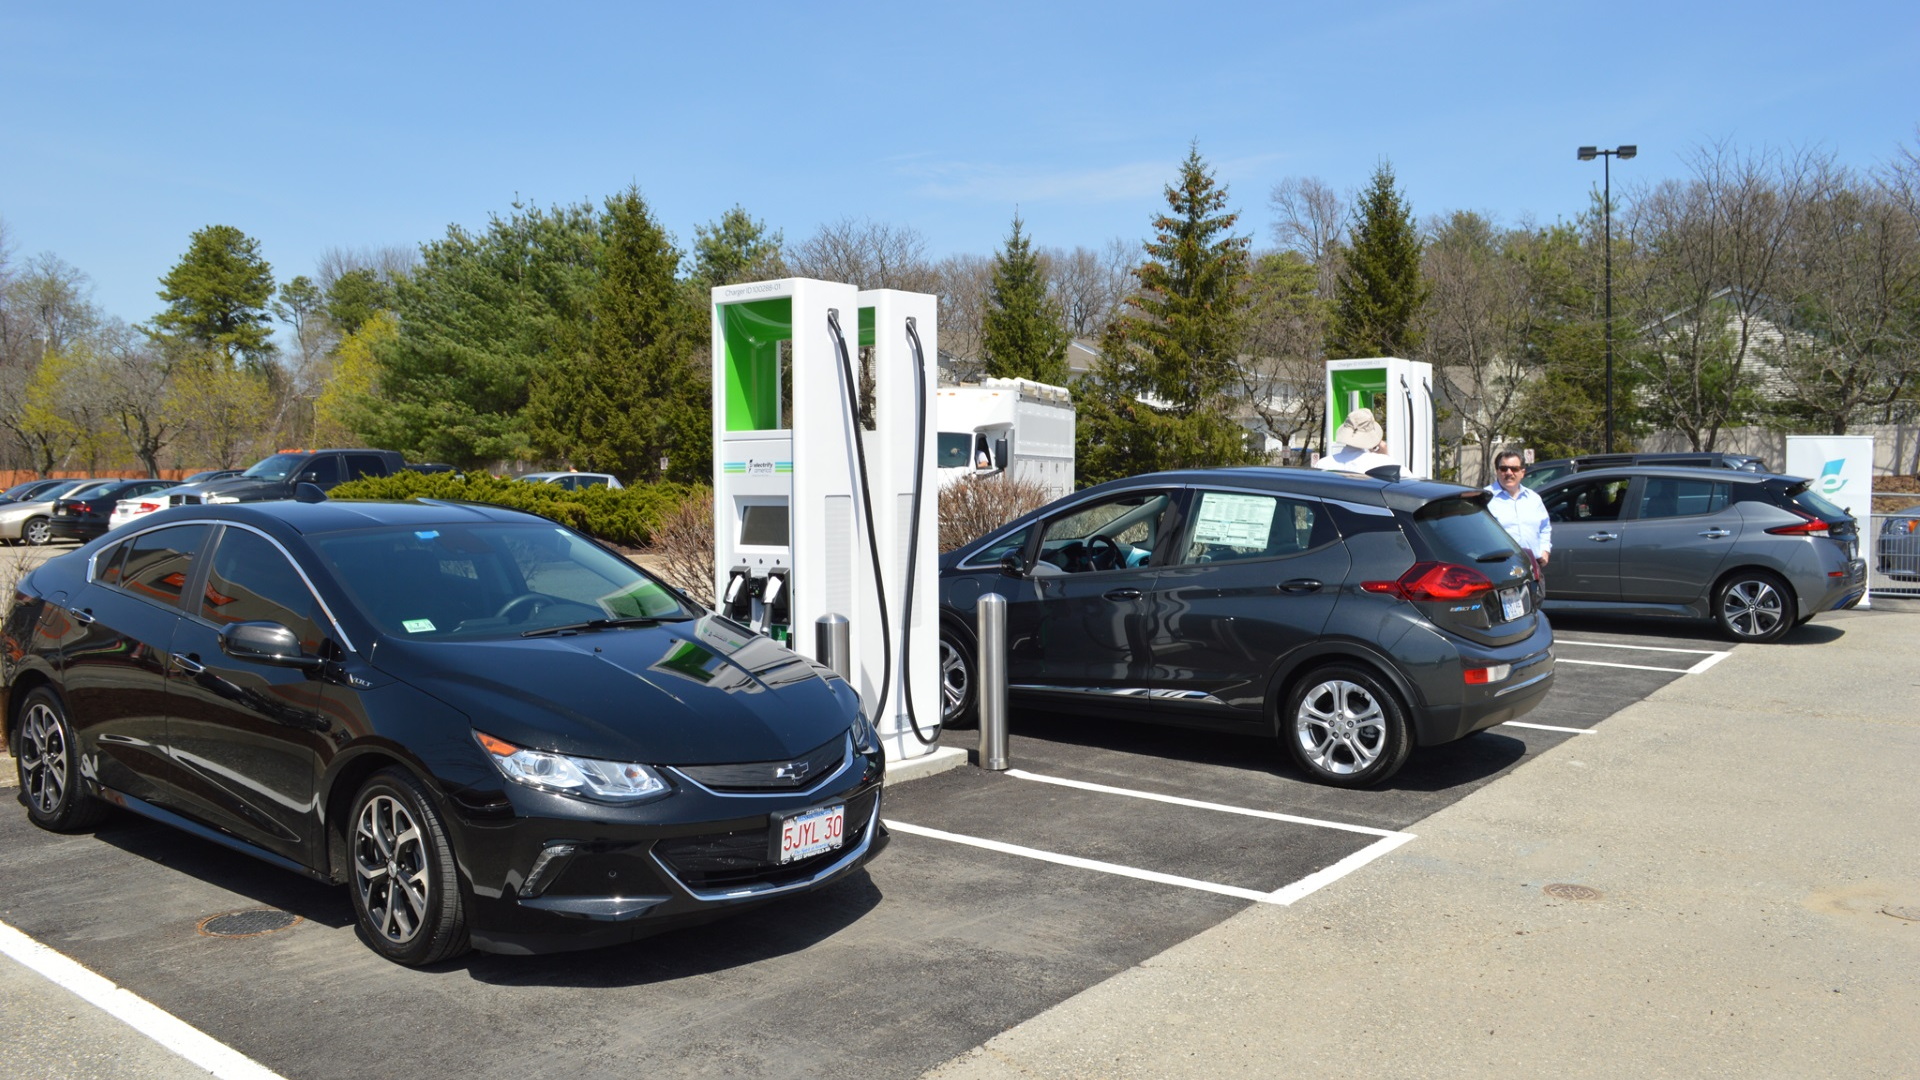 Electrify America 350 kw chargers at Home Depot in Chicopee, Mass.